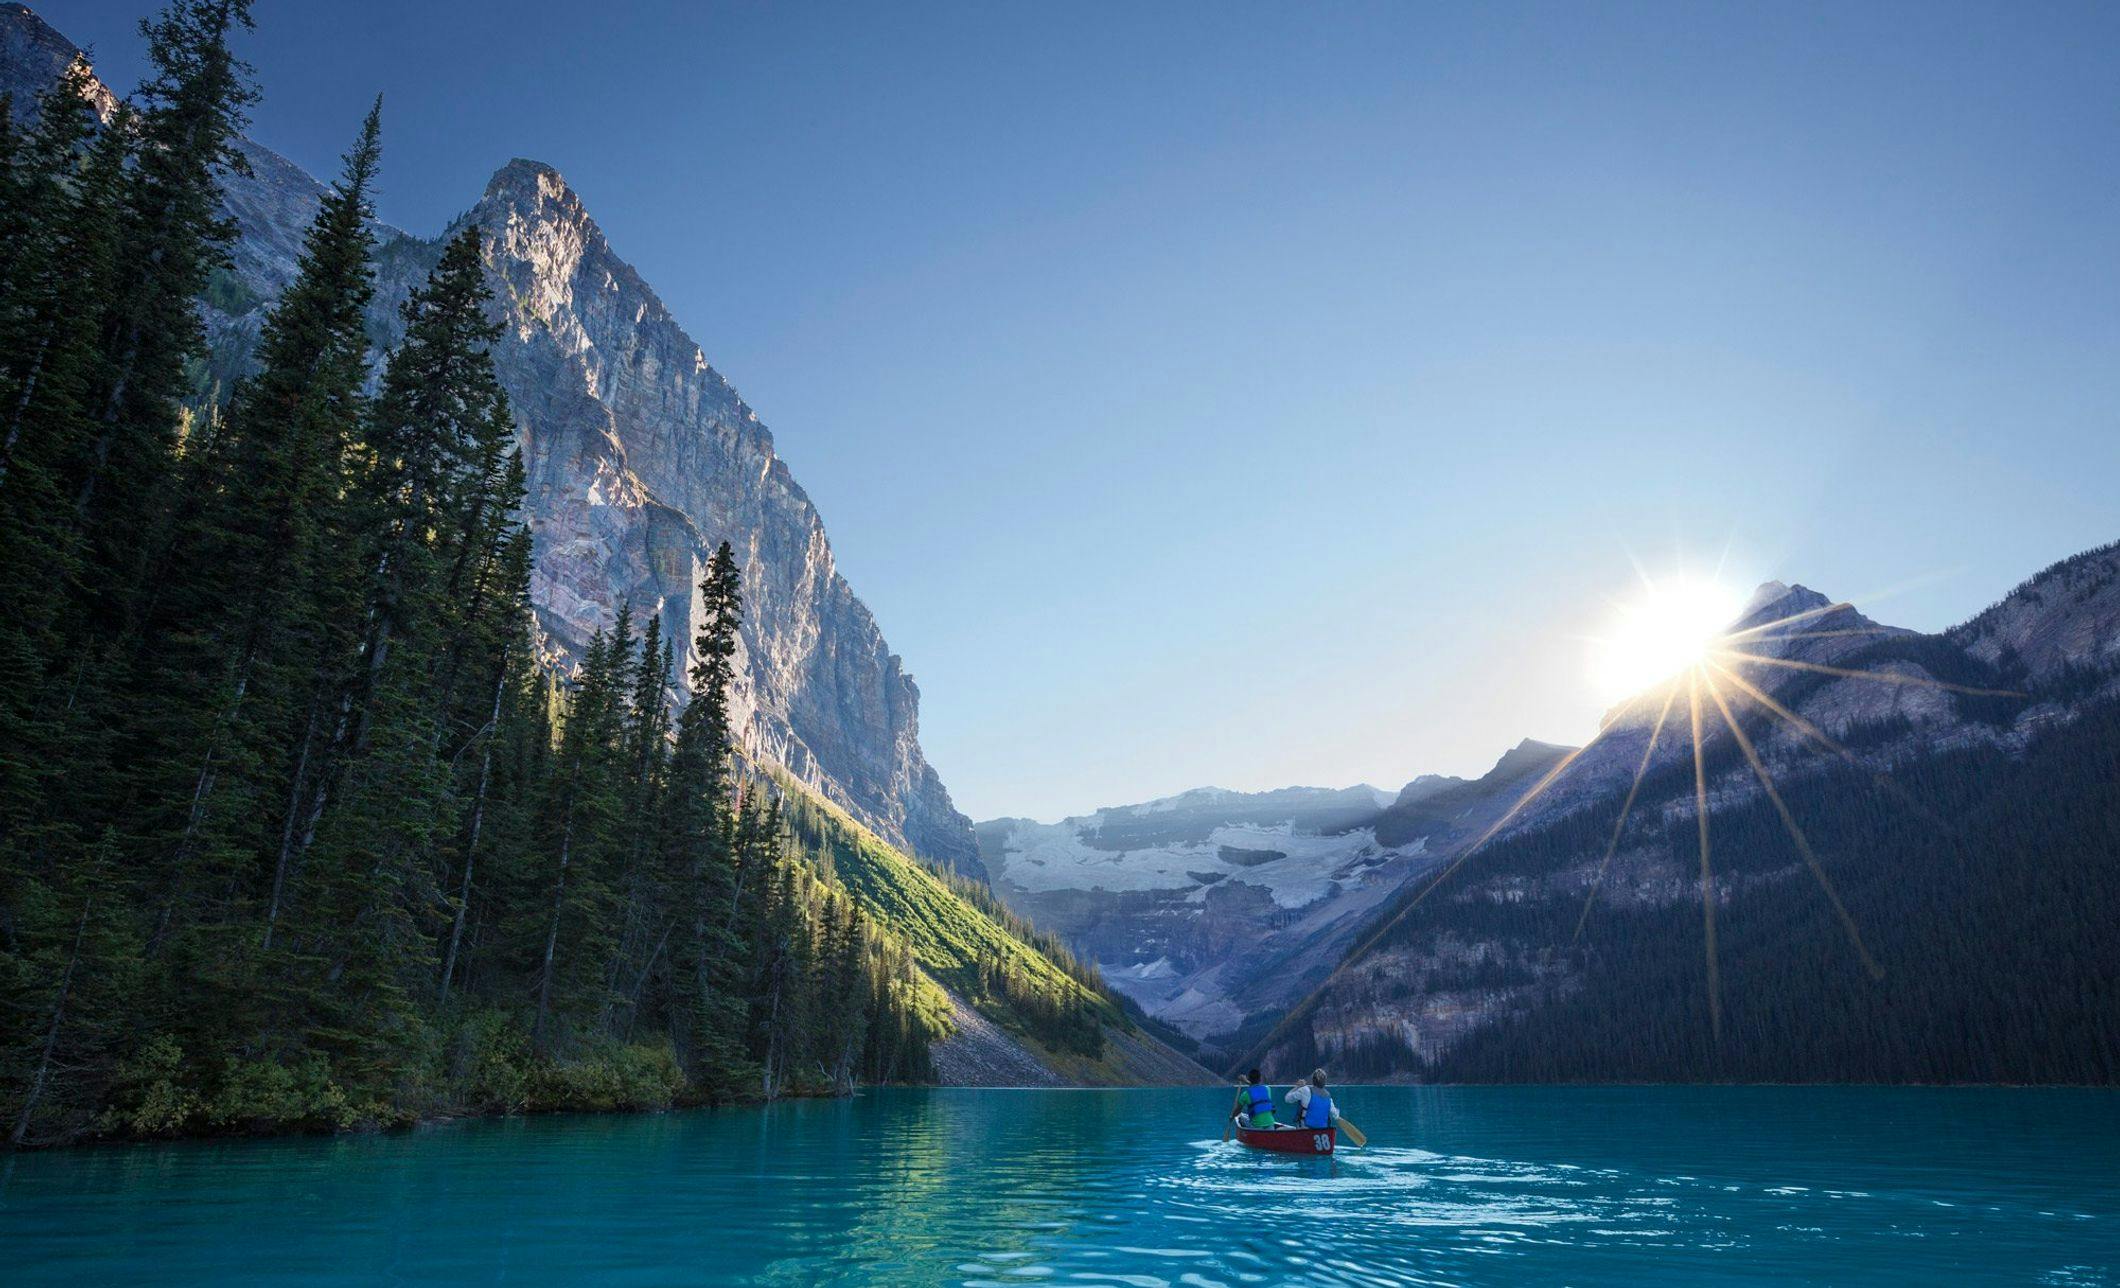 The sun peaks out from behind Mt. Victoria as paddlers navigate their canoe over the emerald waters of Lake Louise